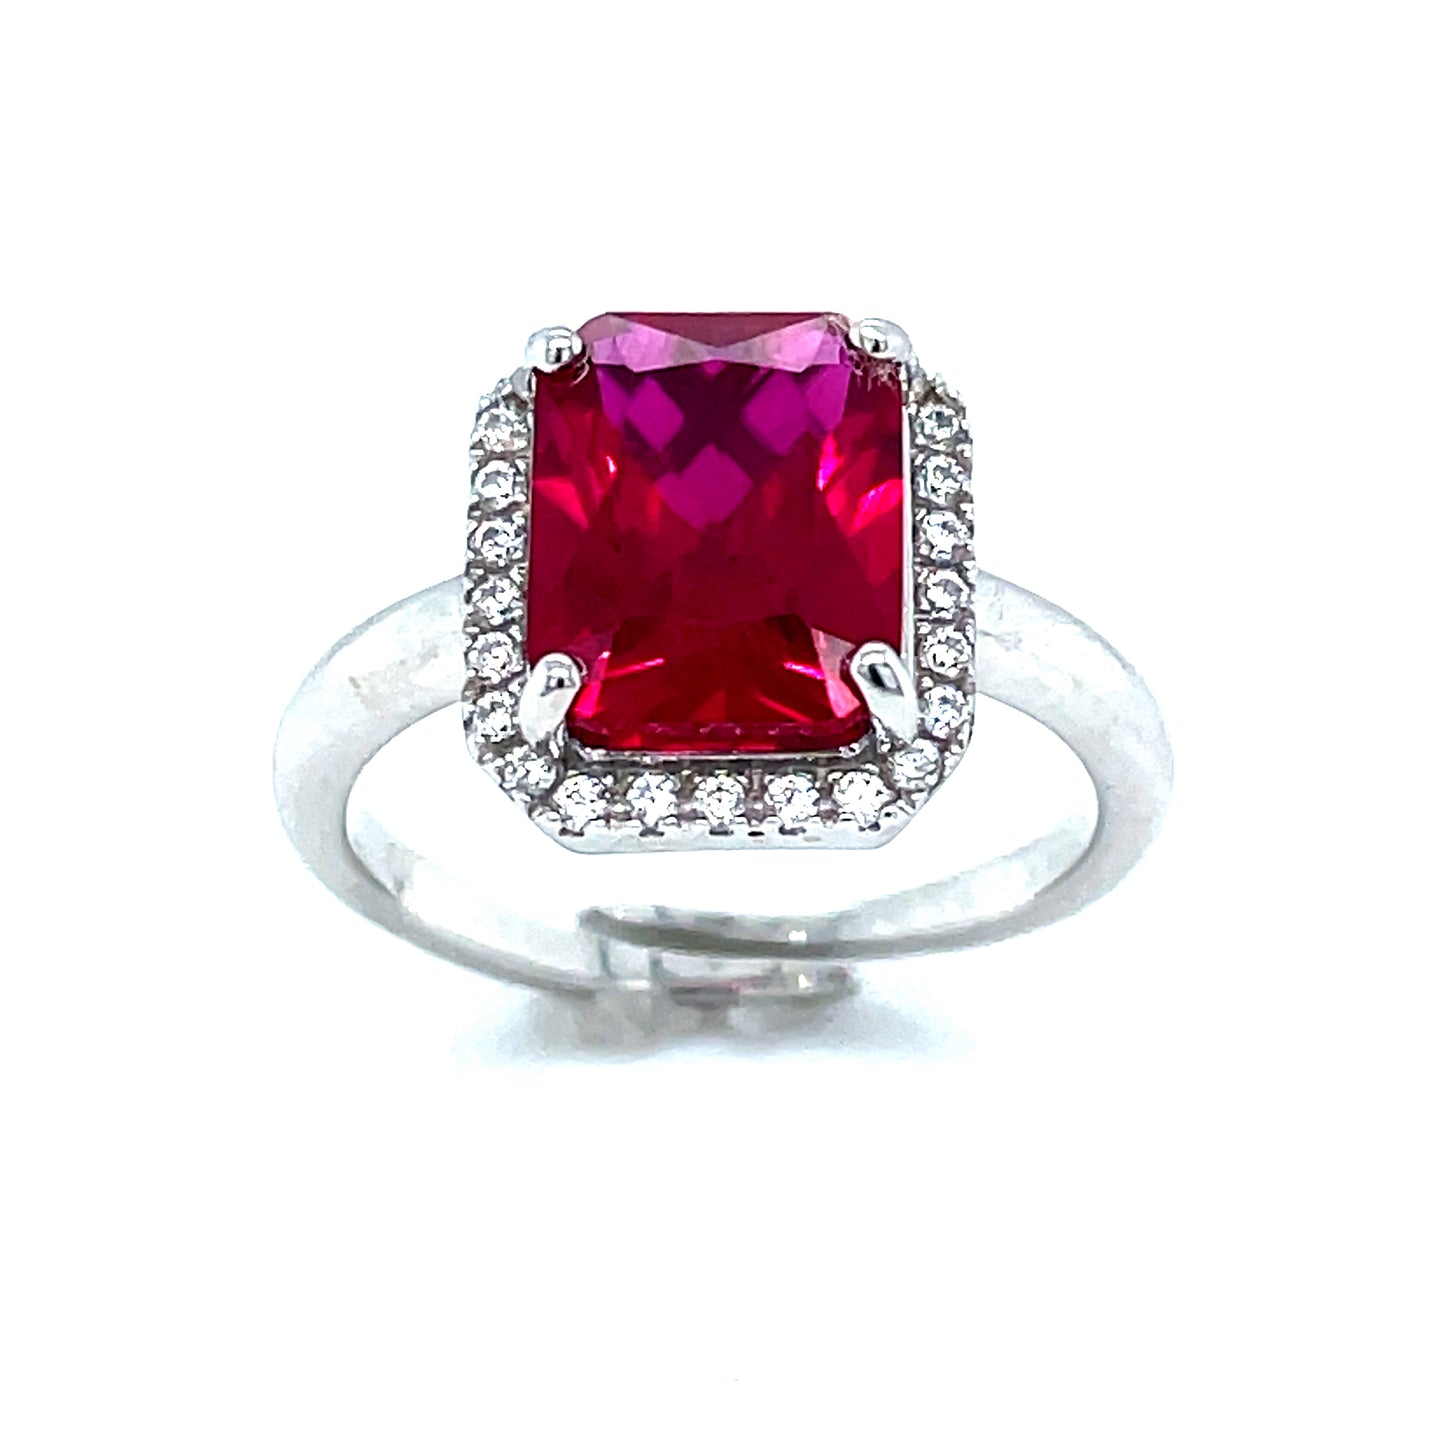 STERLING SILVER CUBIC ZIRCONIA AND RED STONE EMERALD CUT HALO EXPANDER RING